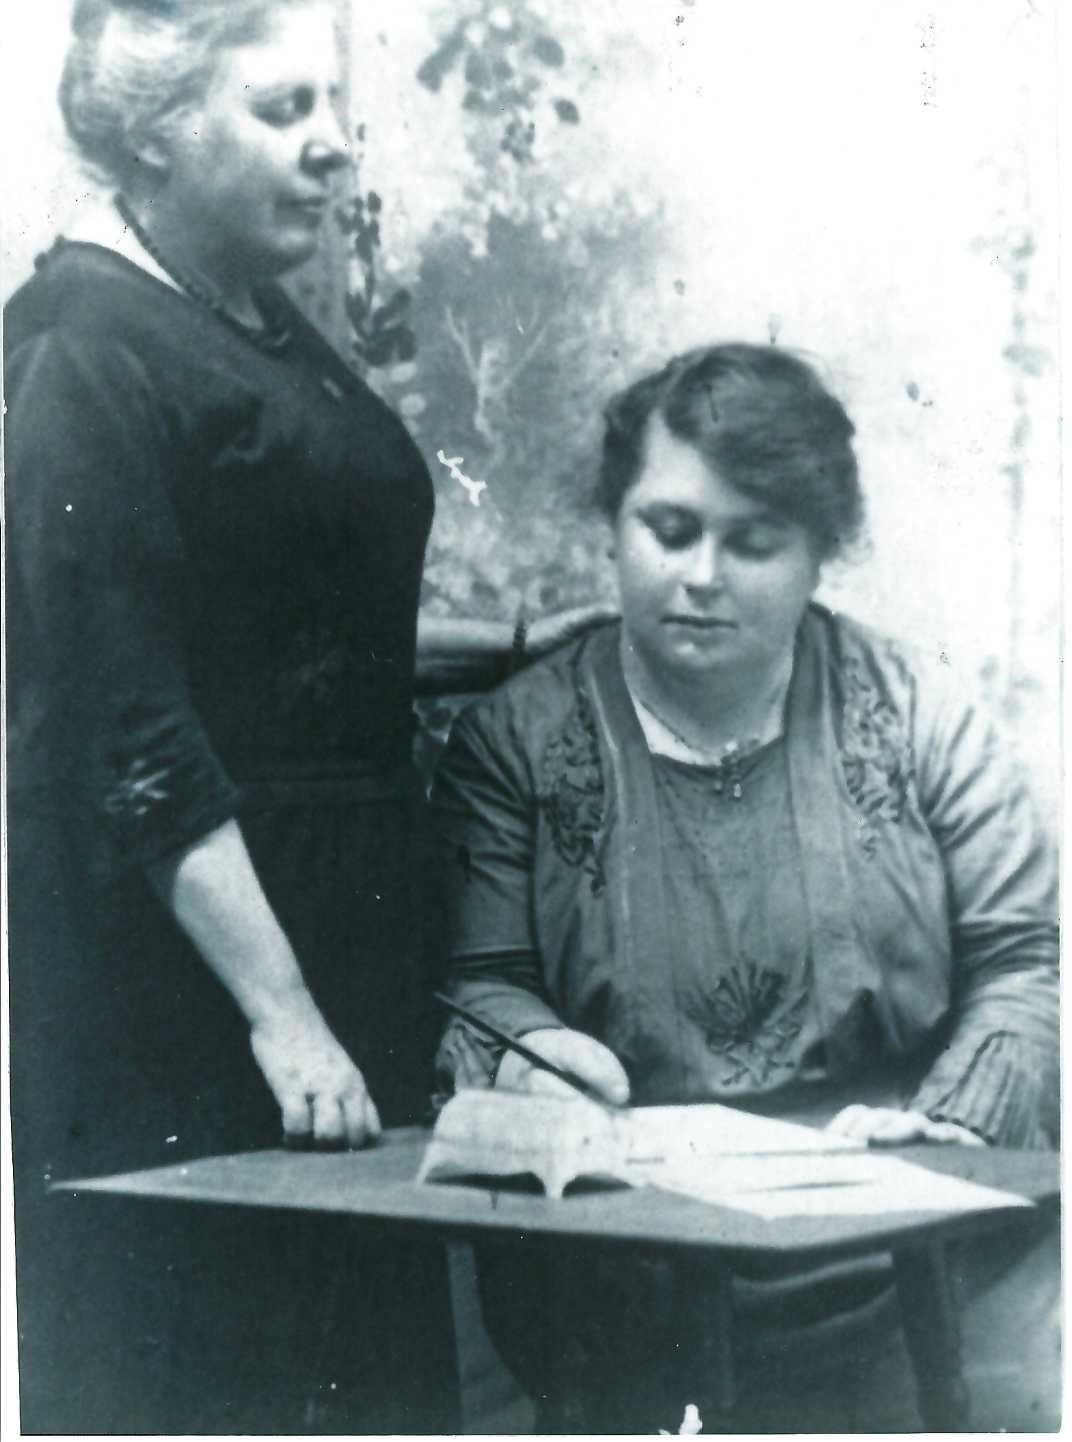 Image 1 of 4 - Black and white photograph of Susan, standing with her hand on the shoulder of a female seated pupil.